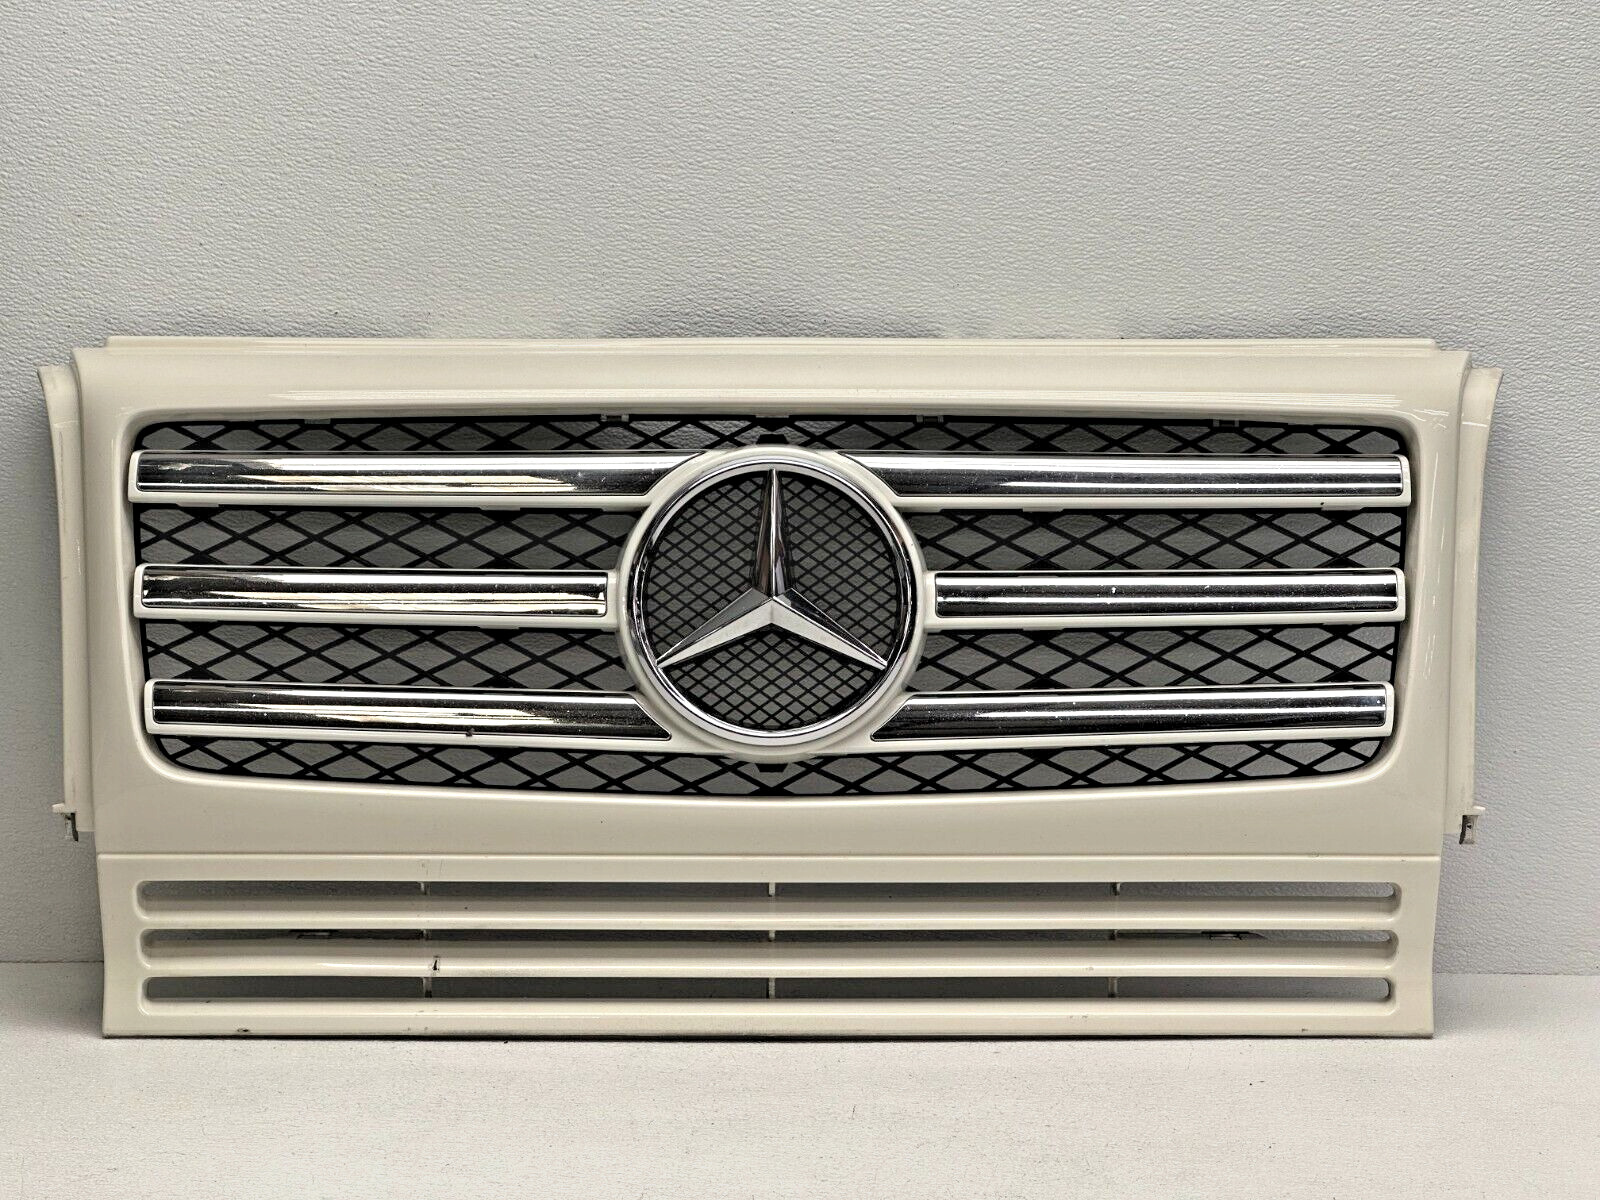 2002-2018 MERCEDES G-CLASS G WAGON G55 AMG FRONT UPPER GRIL GRILLE OEM